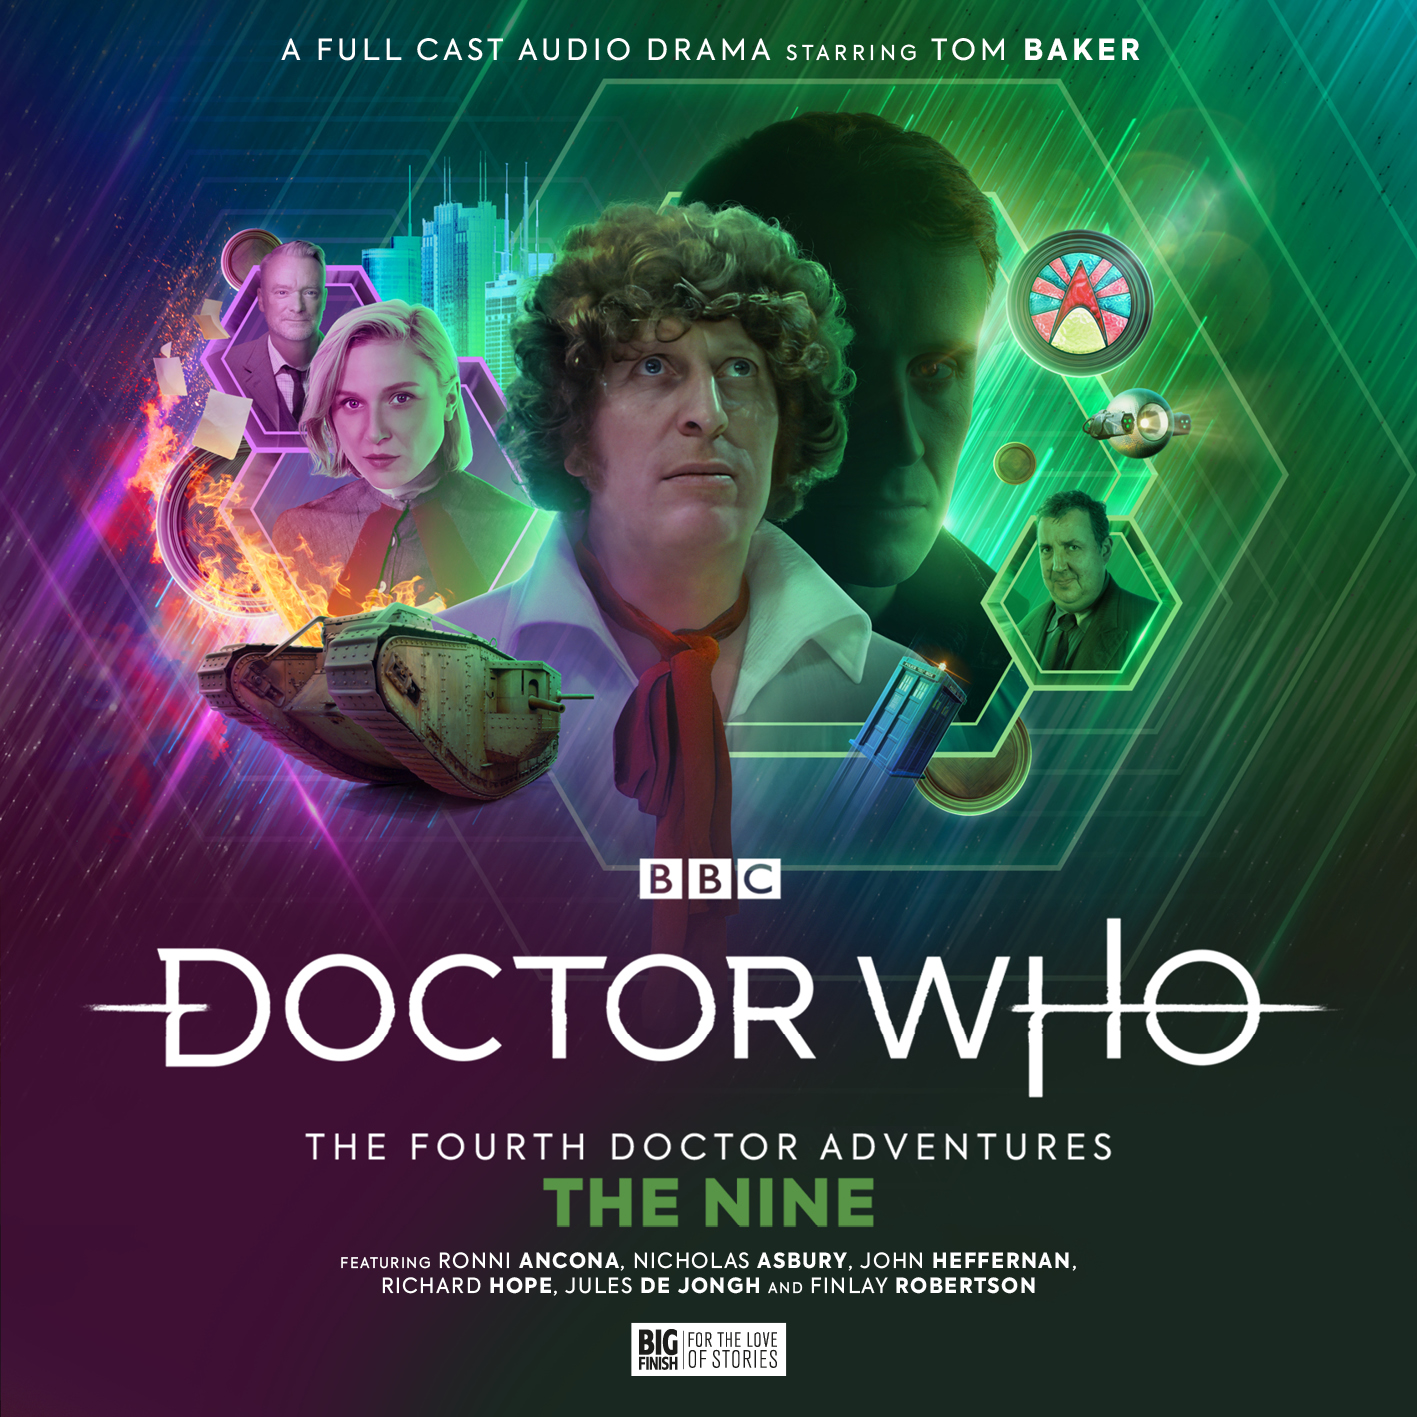 The Fourth Doctor Adventures The Nine cover art